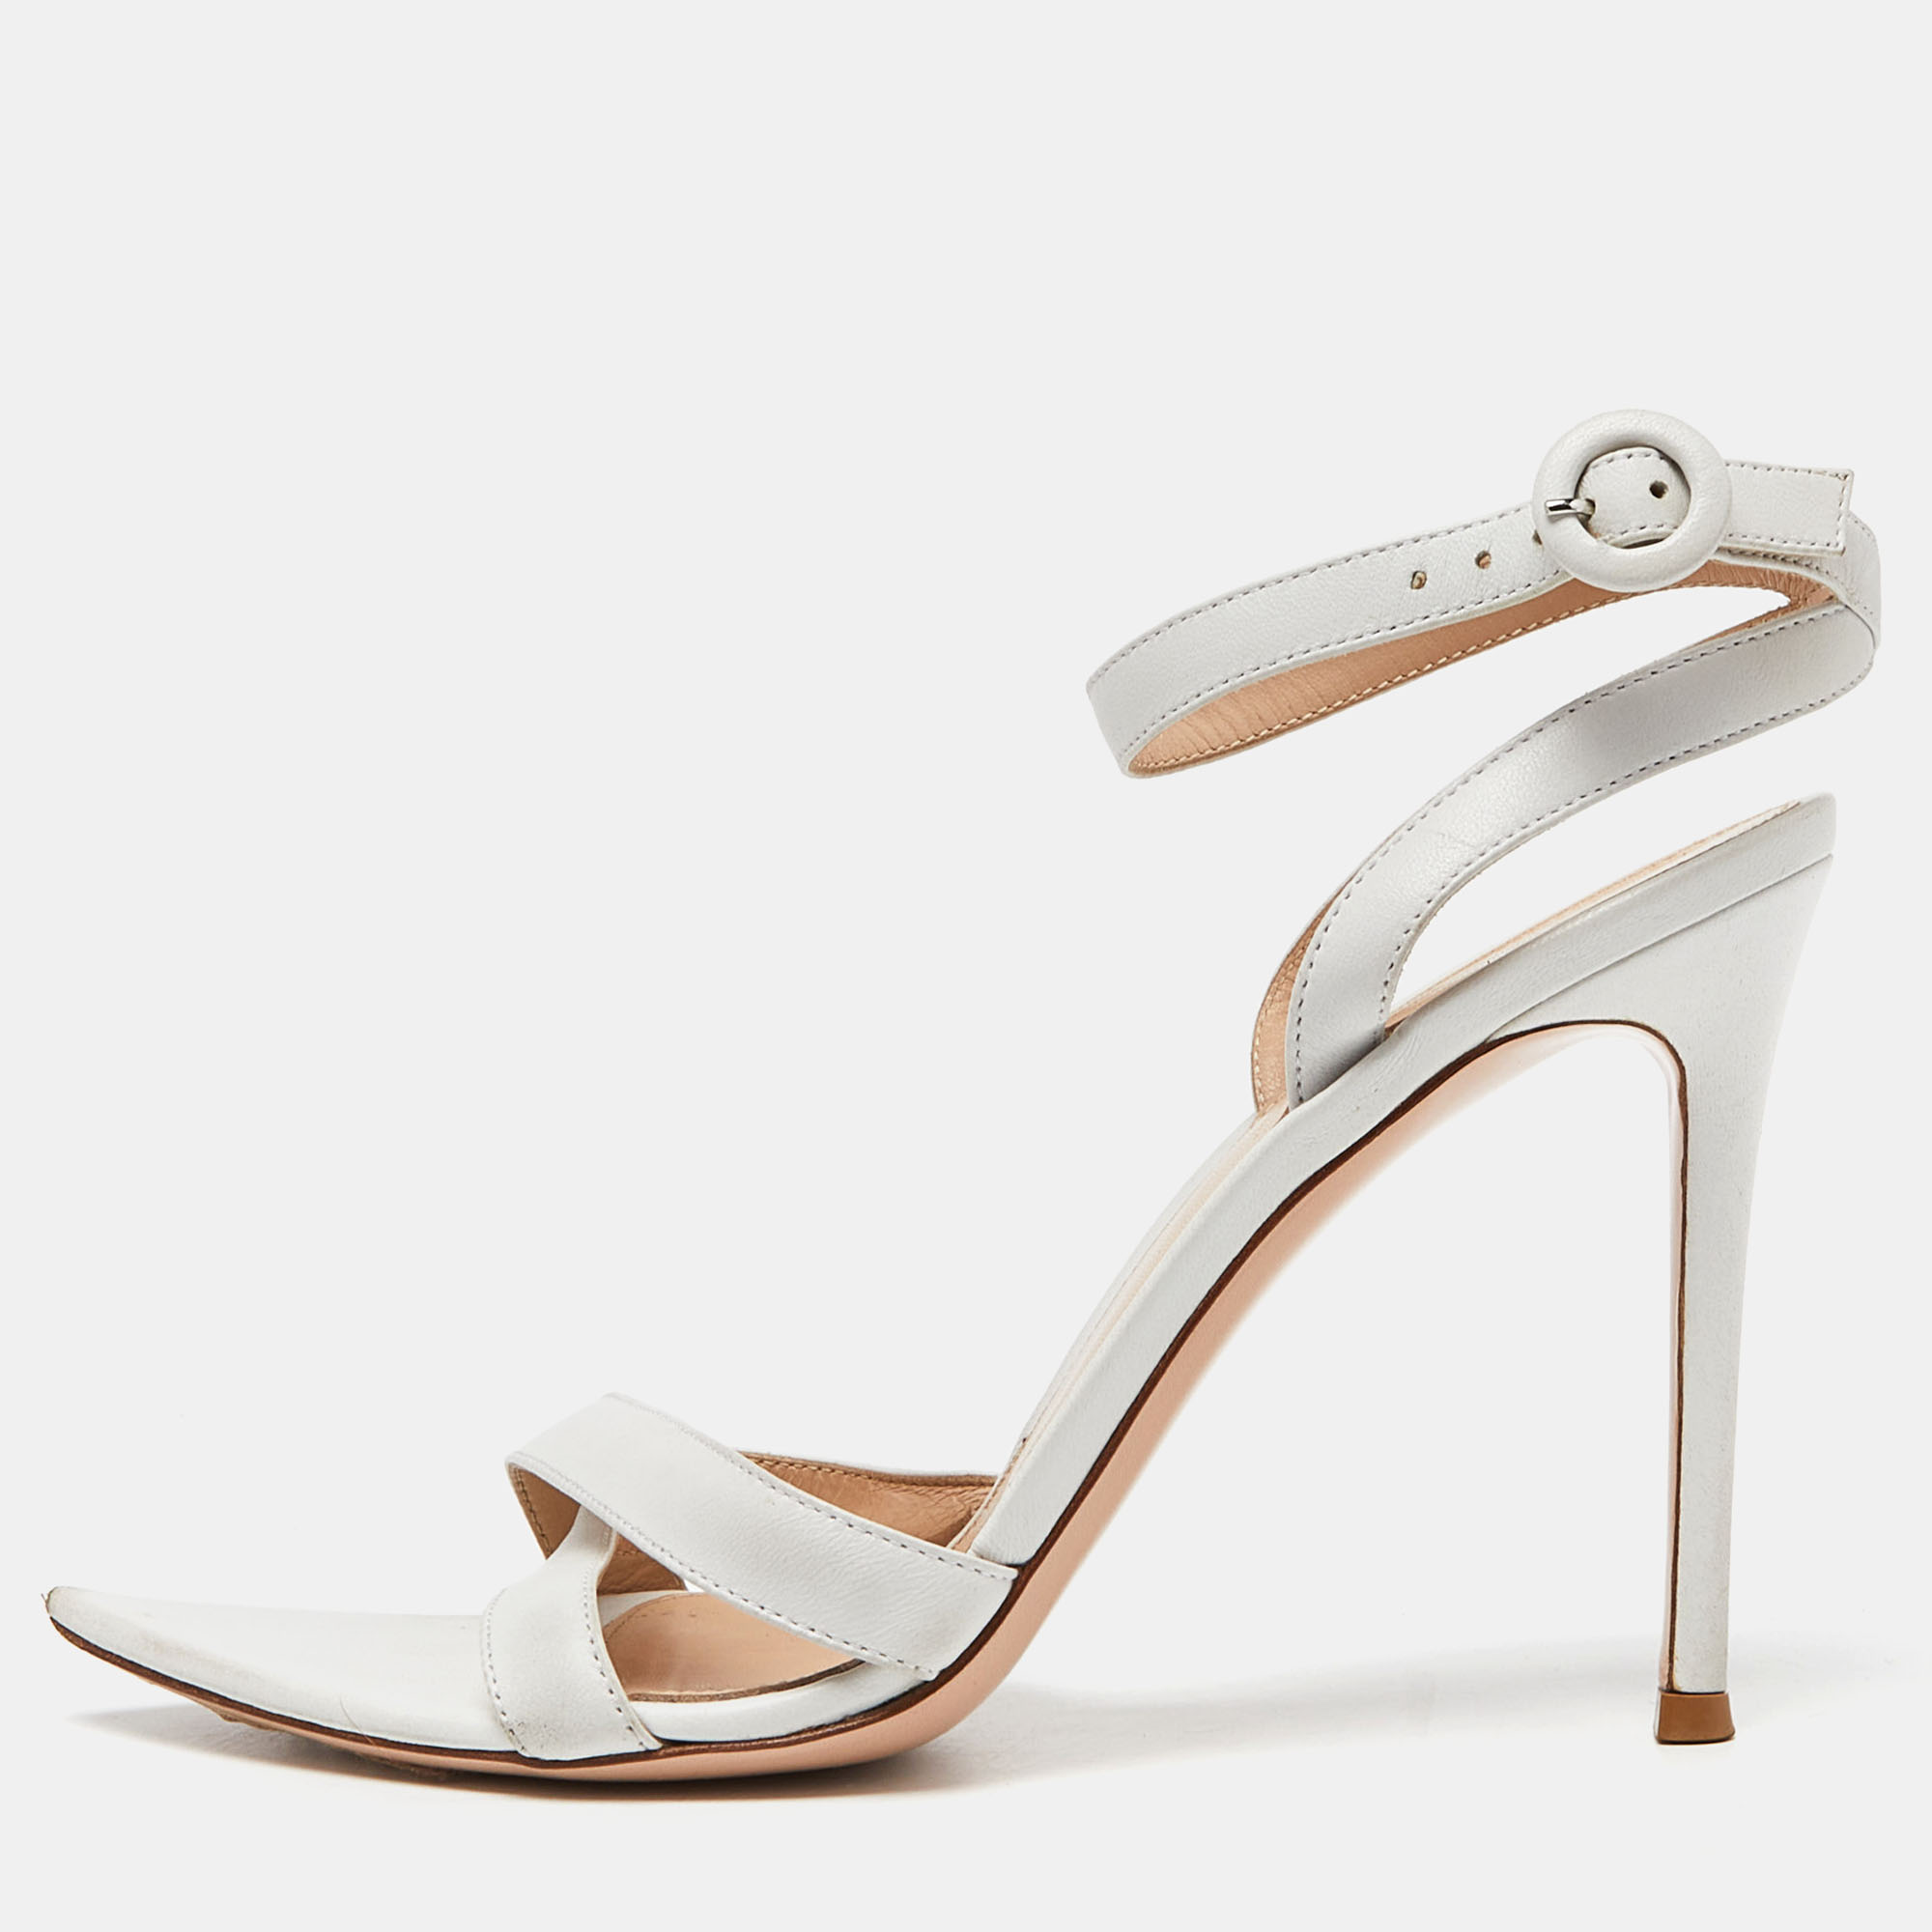 Gianvito rossi white leather ankle strap sandals size 38.5